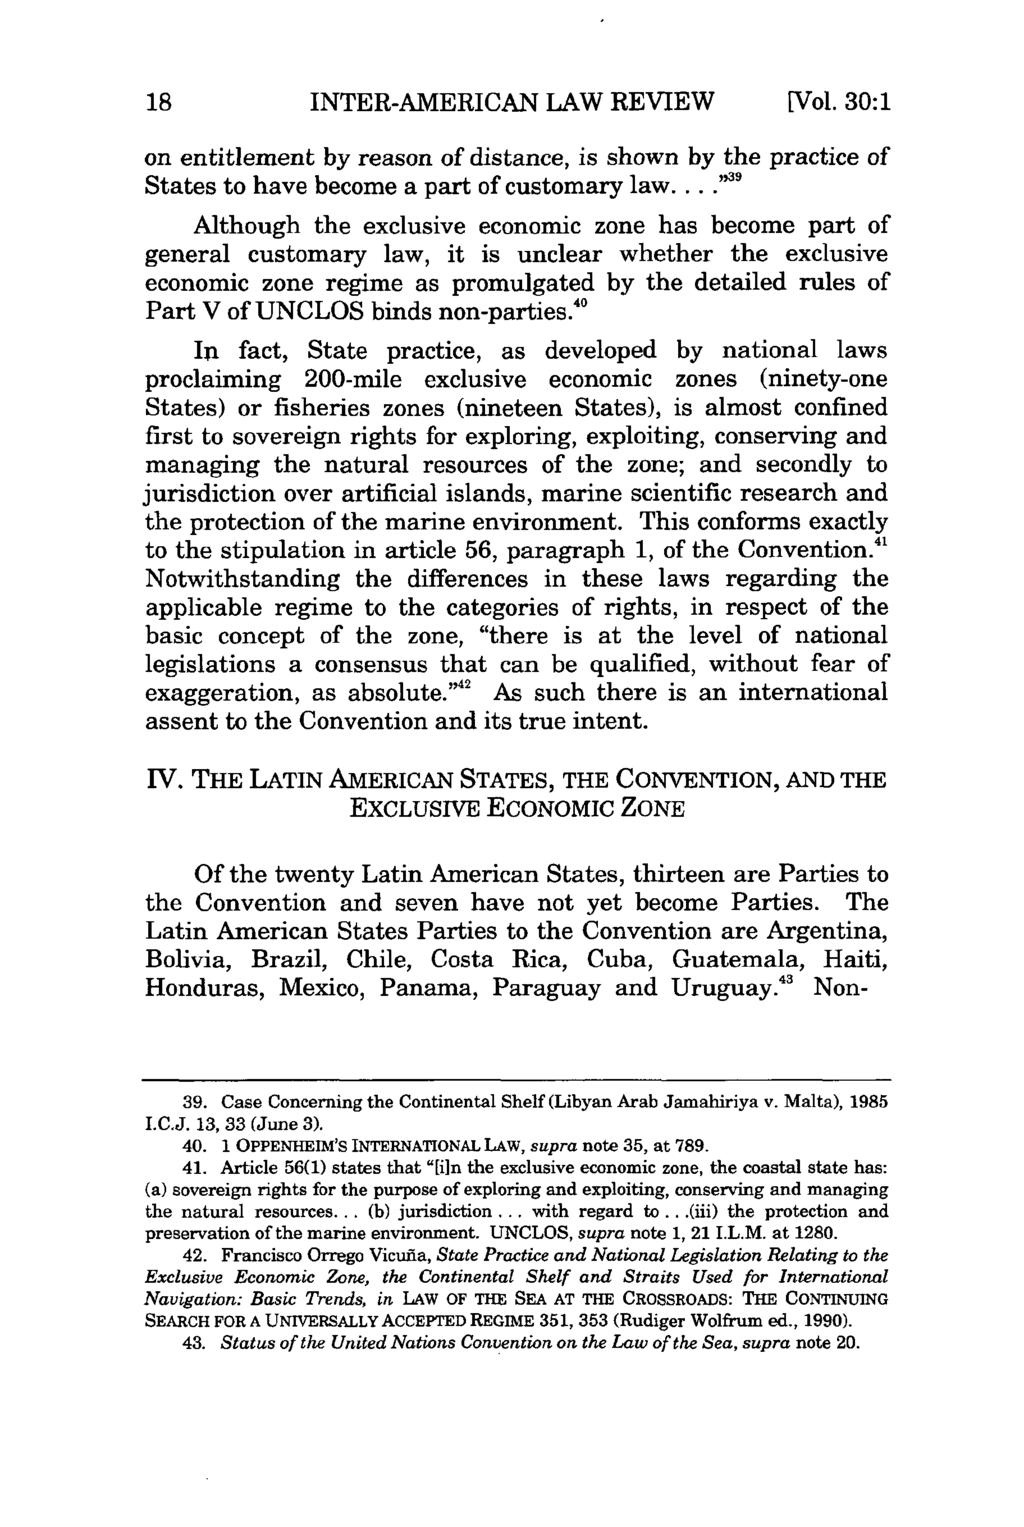 INTER-AMERICAN LAW REVIEW [Vol. 30:1 on entitlement by reason of distance, is shown by the practice of States to have become a part of customary law.